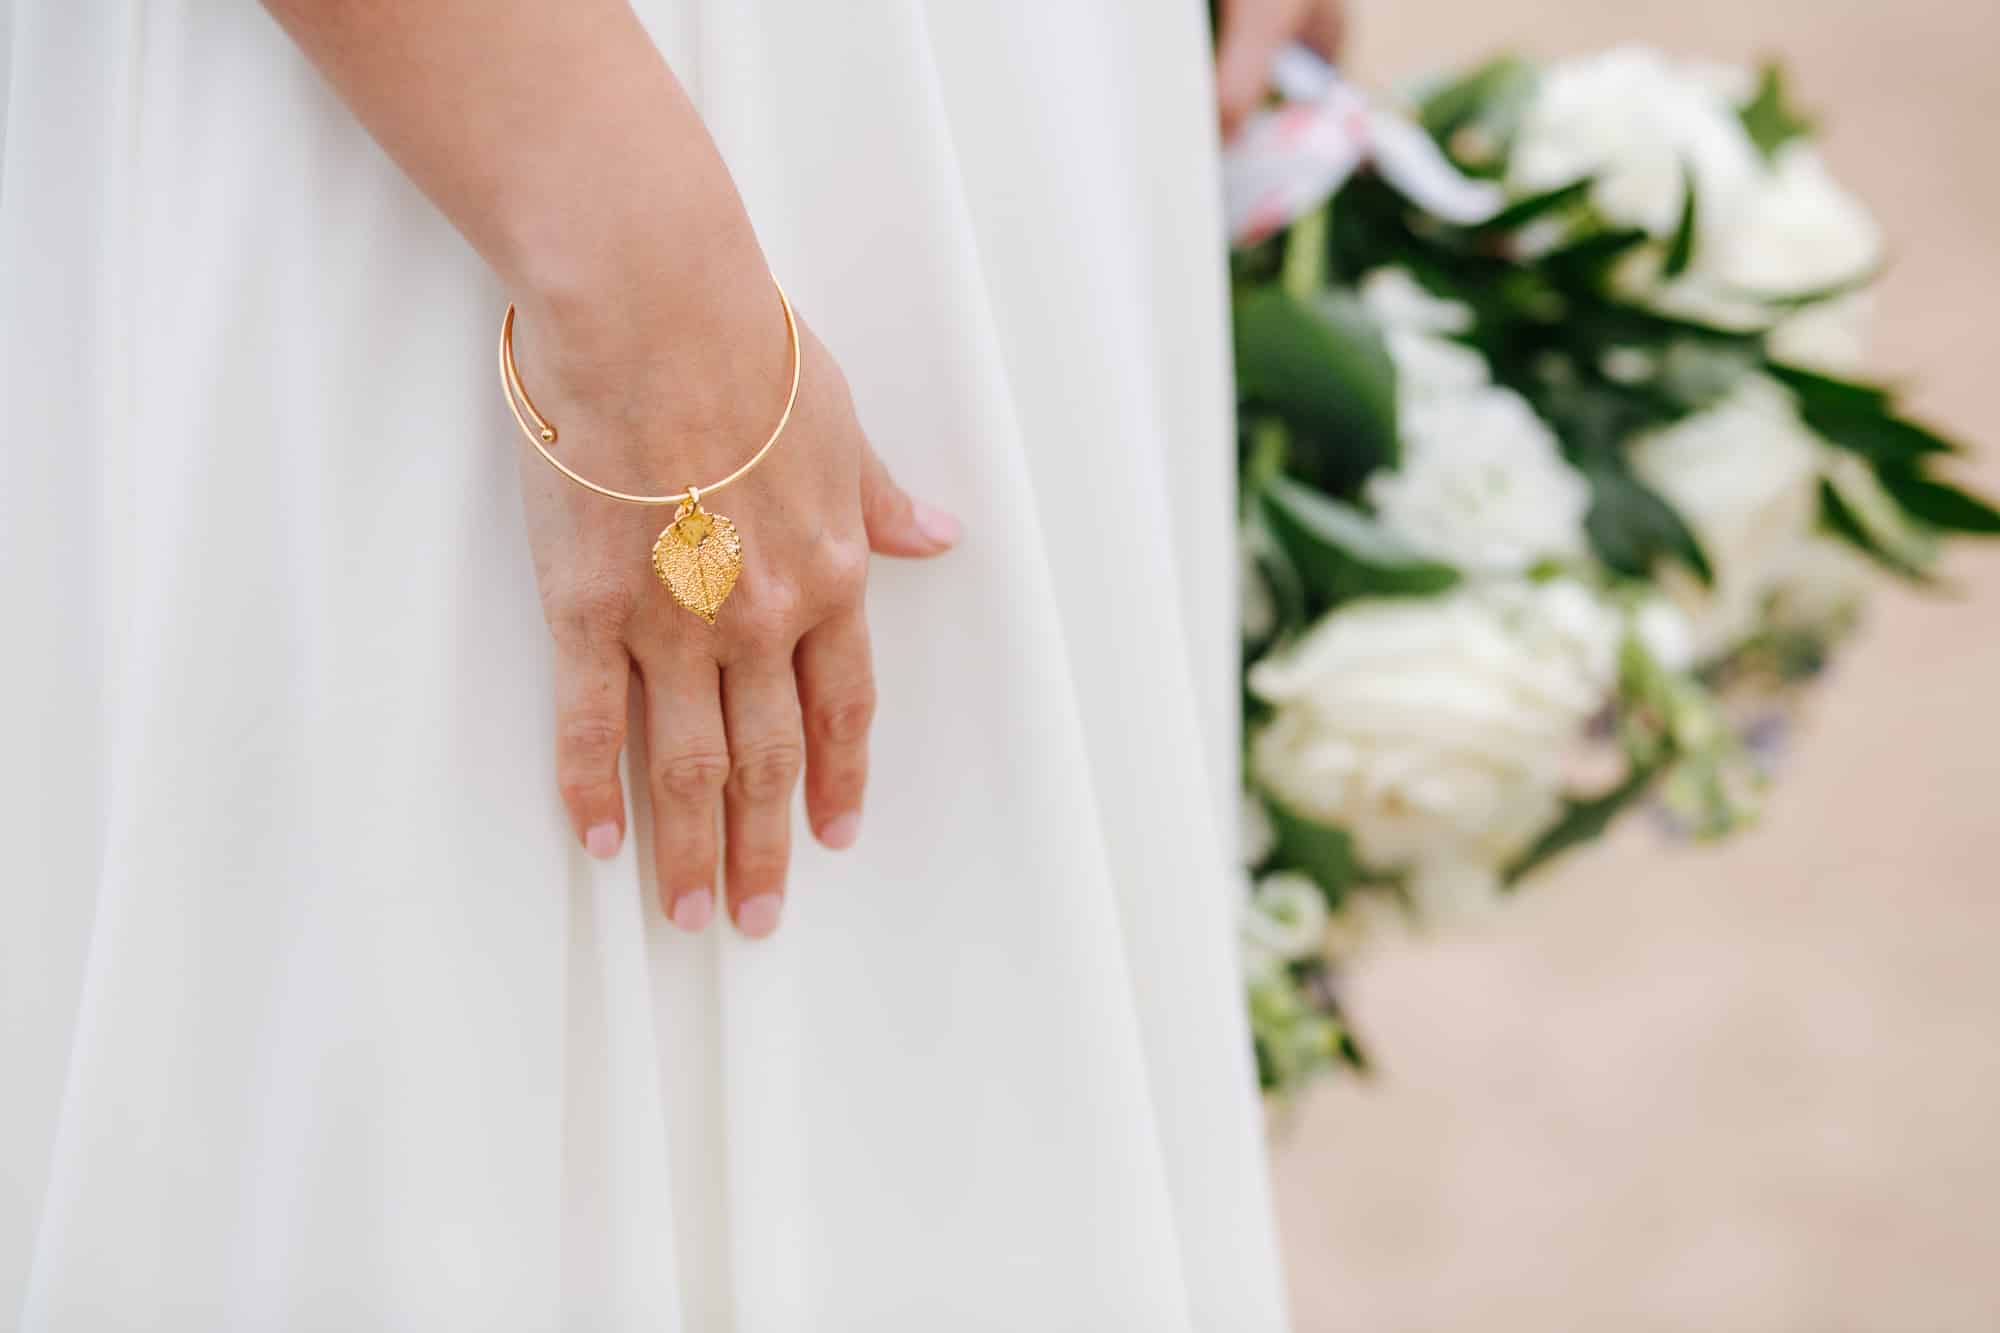 sapphire point, gold wedding jewelry, simple wedding jewelry, gold aspen bracelet, gold leaf bracelet